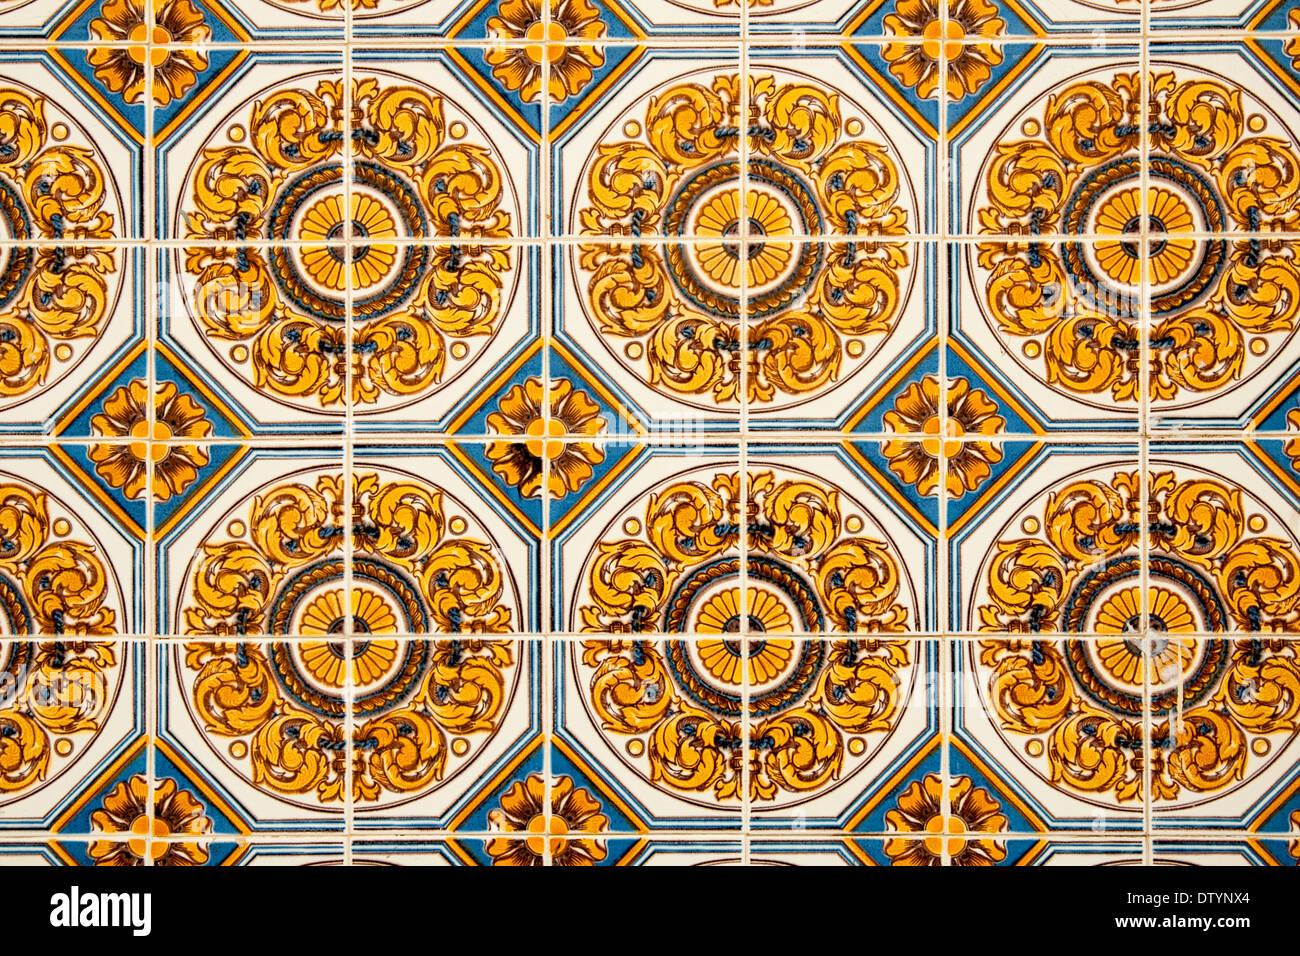 gold and blue patterned ceramic tiles on an external wall in Portugal Stock Photo